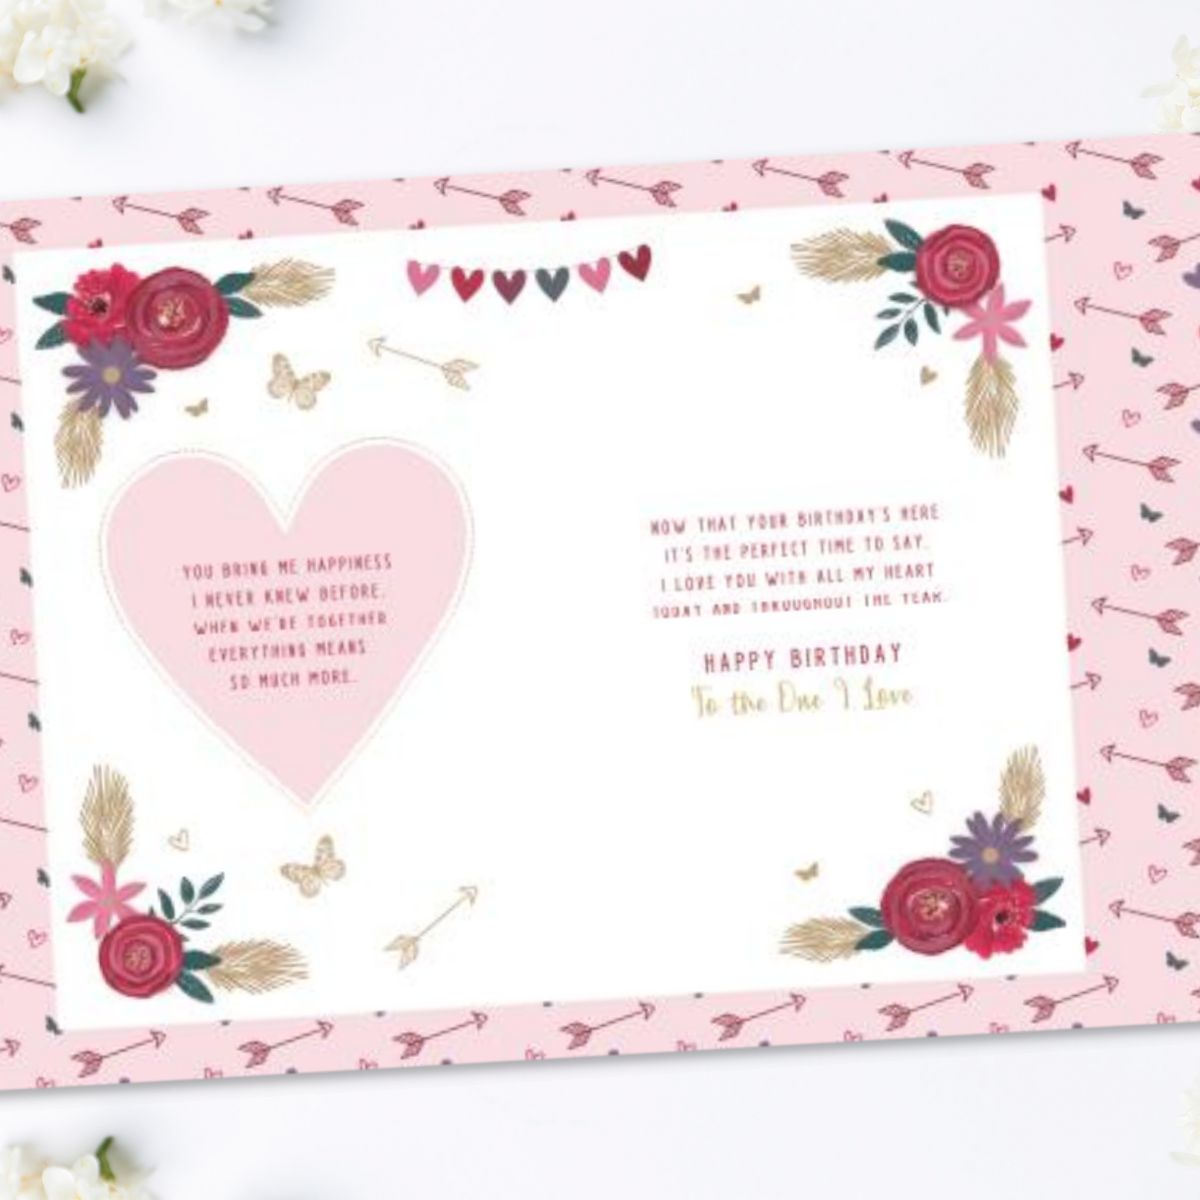 Further two pages with pink cupids arrow border and verse